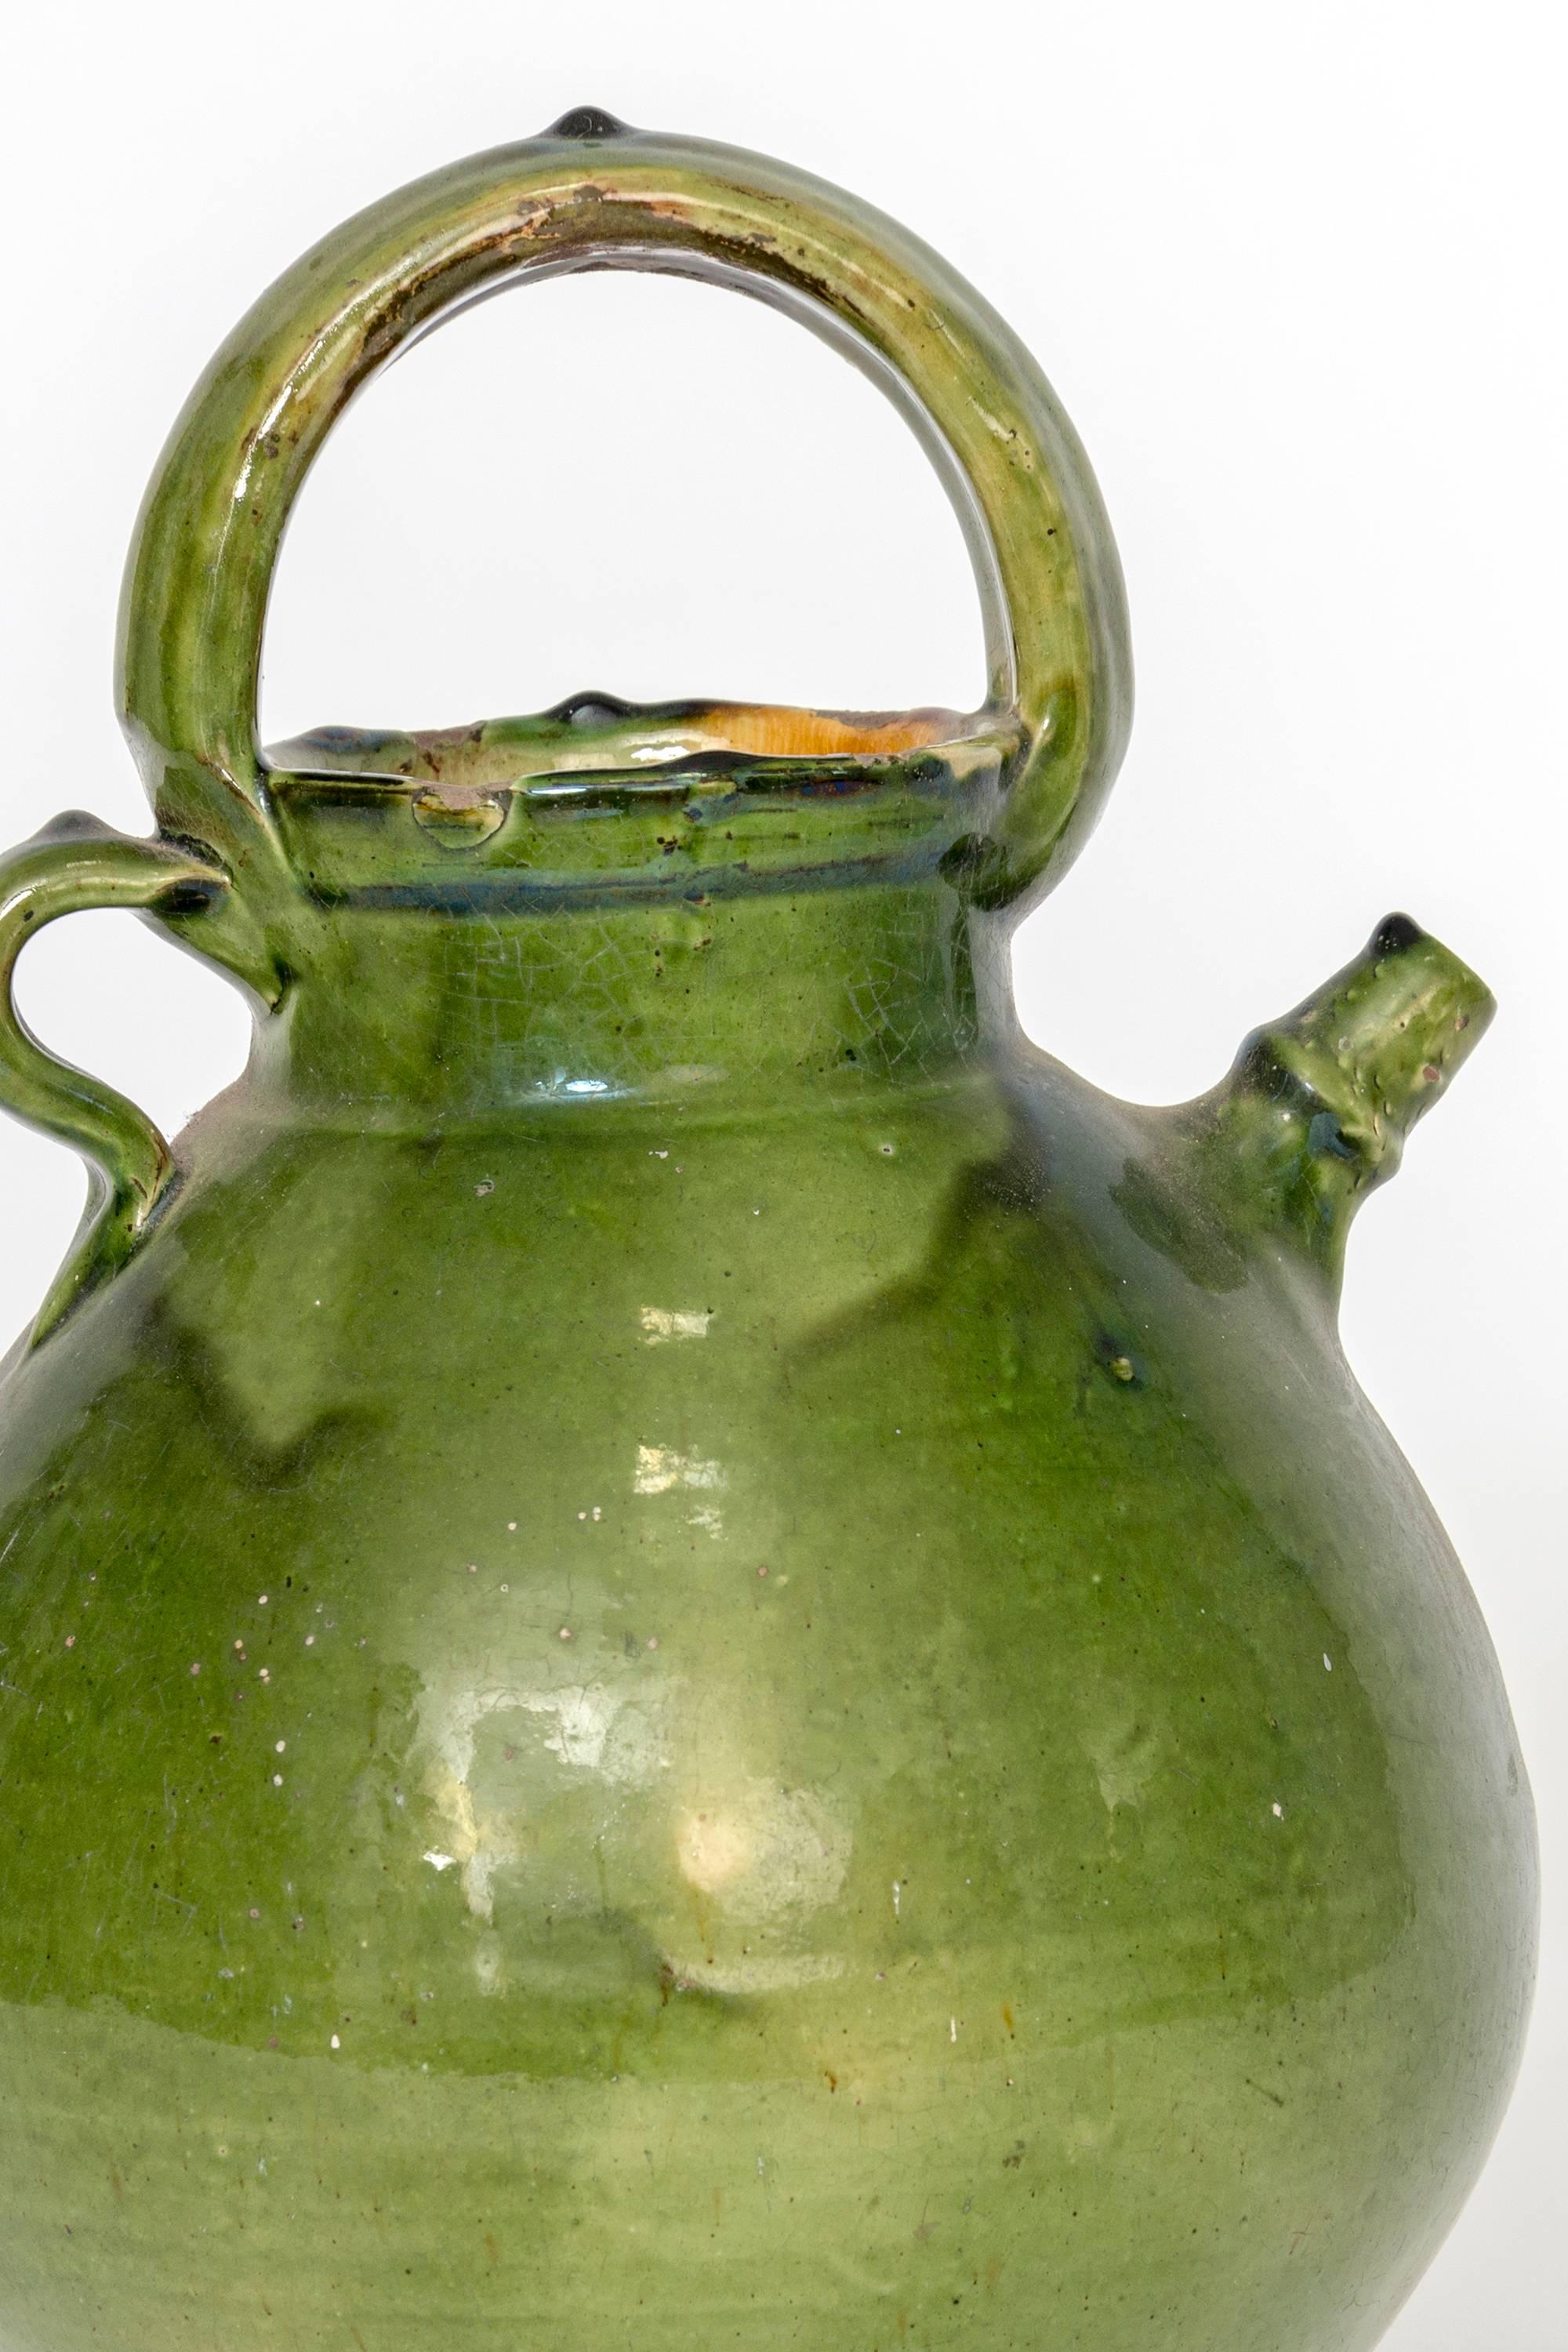 A glazed large French crockery jar most probably used for storing olive oil, circa 1880.